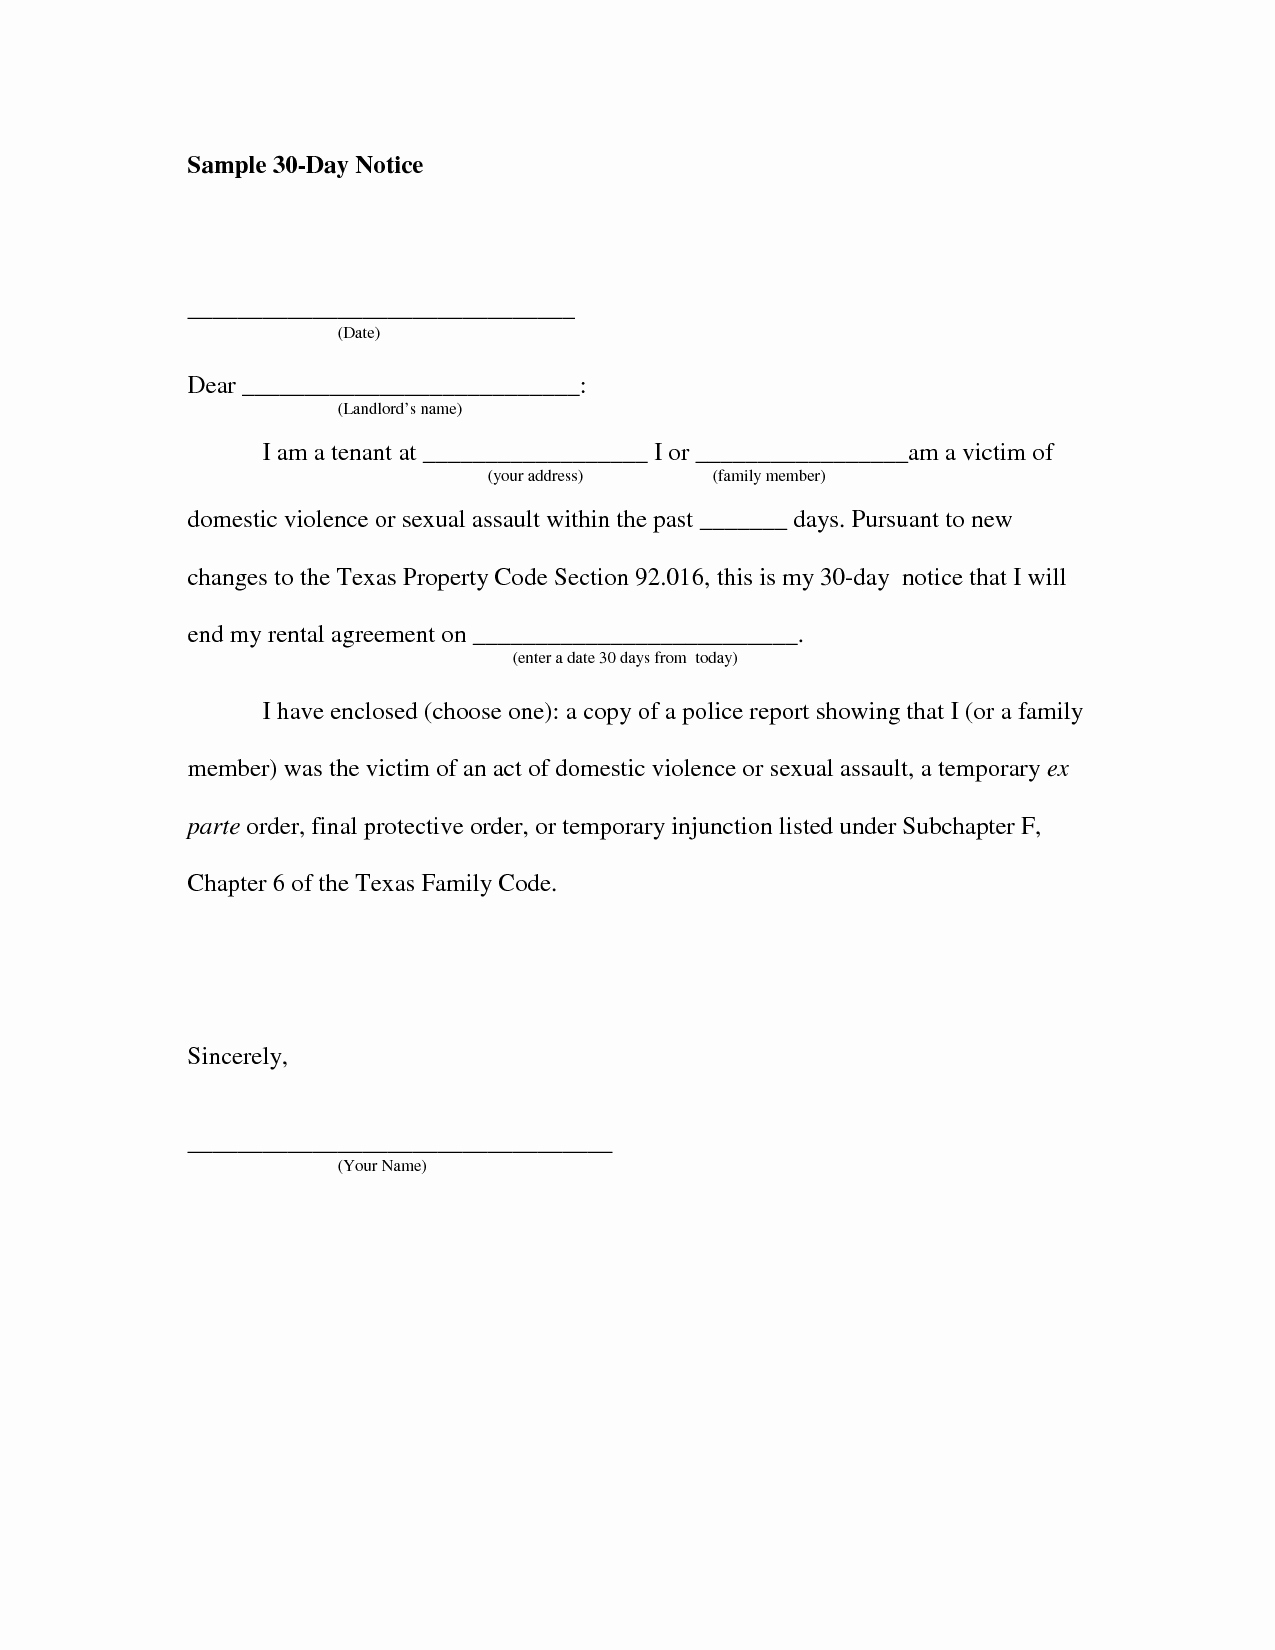 Example Of 30 Day Notice Of Moving Out Luxury Moving House Notice Letter Sample